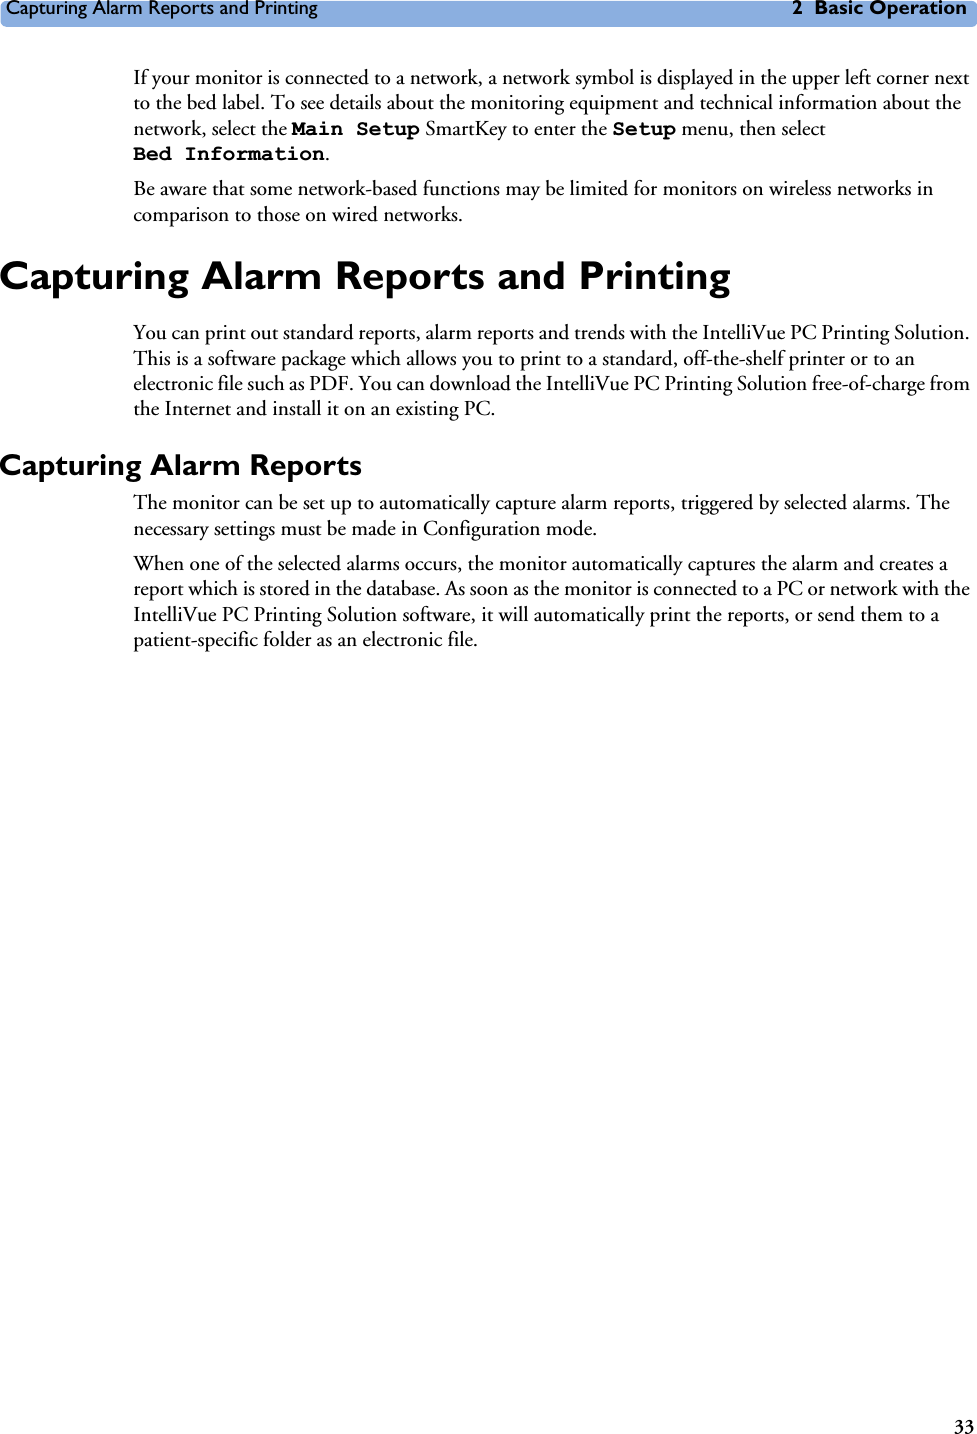 Capturing Alarm Reports and Printing 2 Basic Operation33If your monitor is connected to a network, a network symbol is displayed in the upper left corner next to the bed label. To see details about the monitoring equipment and technical information about the network, select the Main Setup SmartKey to enter the Setup menu, then select Bed Information.Be aware that some network-based functions may be limited for monitors on wireless networks in comparison to those on wired networks.Capturing Alarm Reports and PrintingYou can print out standard reports, alarm reports and trends with the IntelliVue PC Printing Solution. This is a software package which allows you to print to a standard, off-the-shelf printer or to an electronic file such as PDF. You can download the IntelliVue PC Printing Solution free-of-charge from the Internet and install it on an existing PC. Capturing Alarm ReportsThe monitor can be set up to automatically capture alarm reports, triggered by selected alarms. The necessary settings must be made in Configuration mode. When one of the selected alarms occurs, the monitor automatically captures the alarm and creates a report which is stored in the database. As soon as the monitor is connected to a PC or network with the IntelliVue PC Printing Solution software, it will automatically print the reports, or send them to a patient-specific folder as an electronic file. 